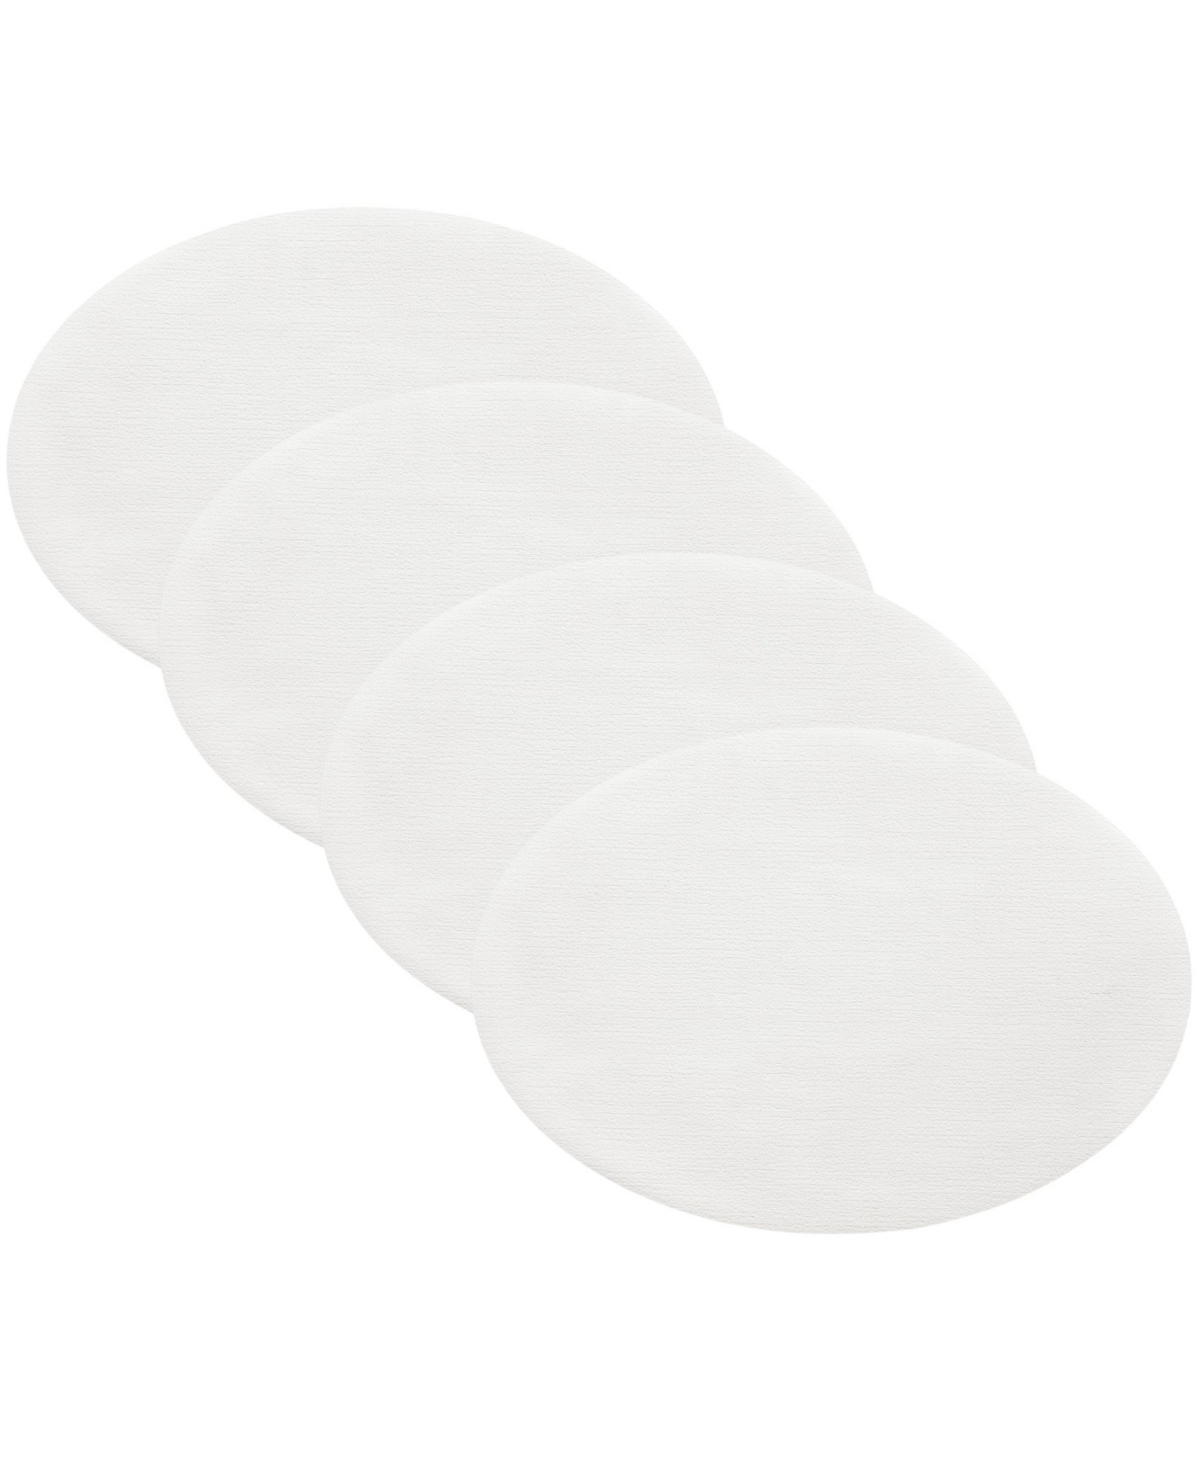 Villeroy & Boch Manufacture Rock Faux Leather Placemat, Set Of 4 In White